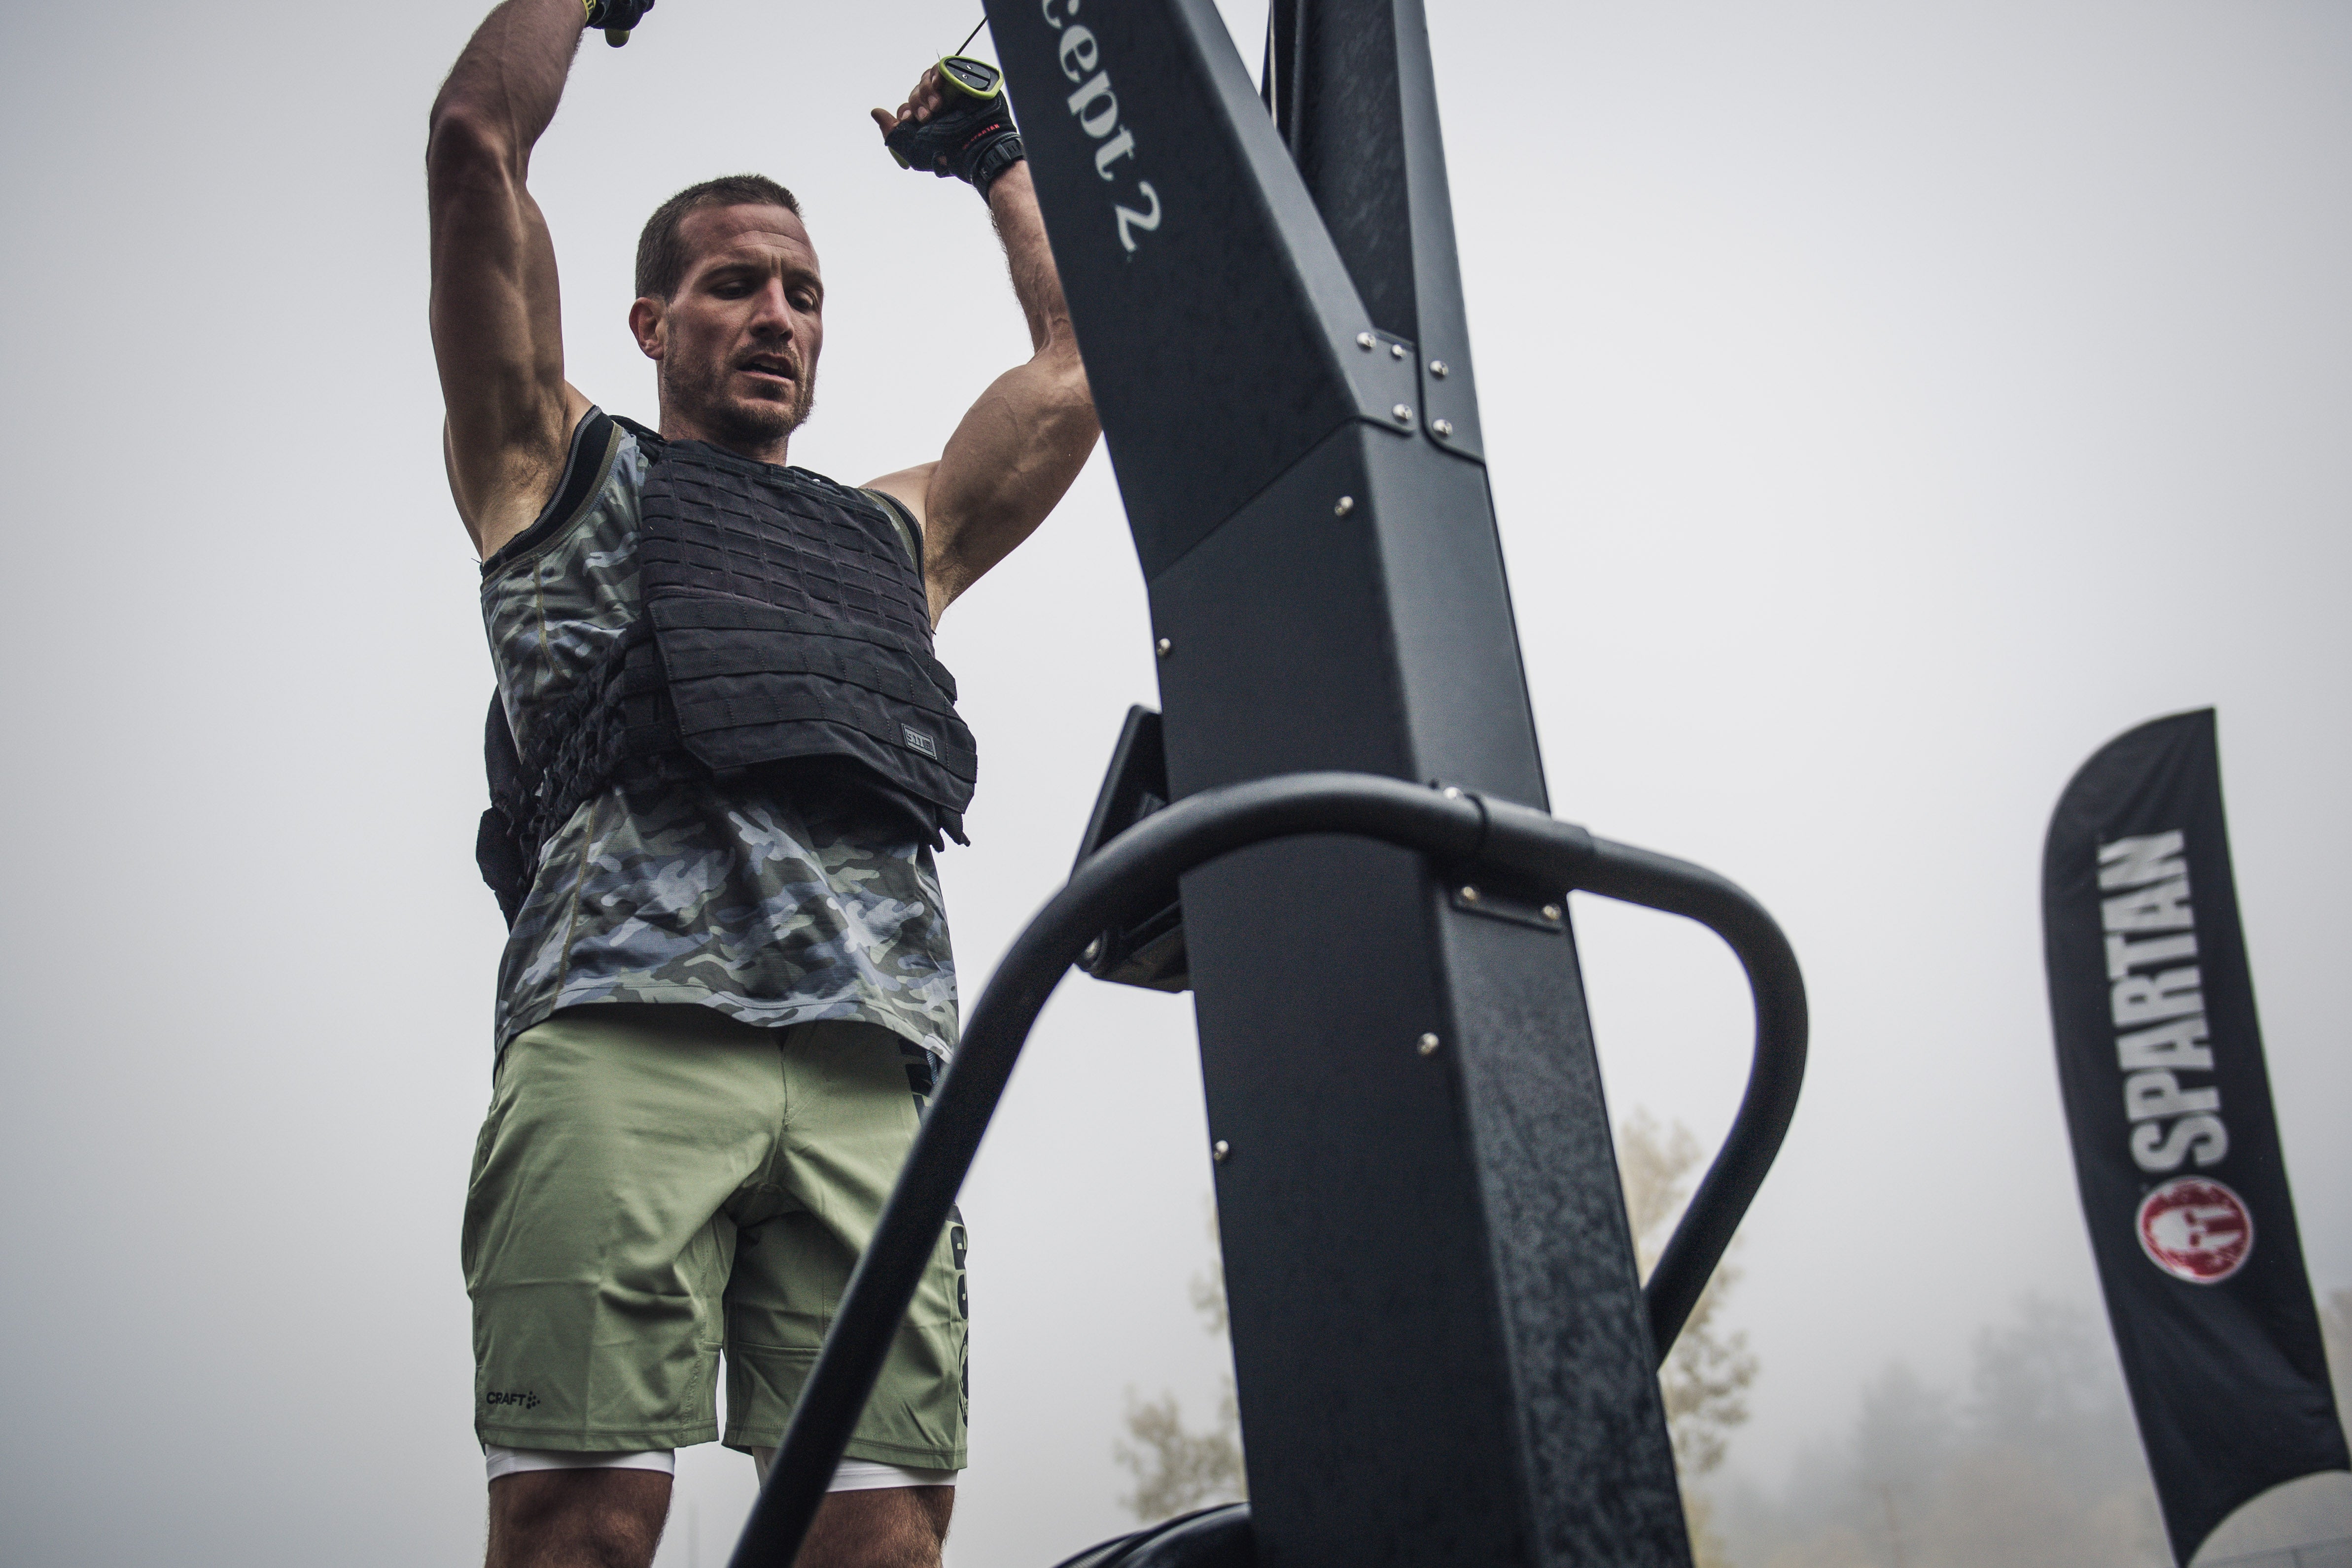 a spartan racer working out in a weighted vest